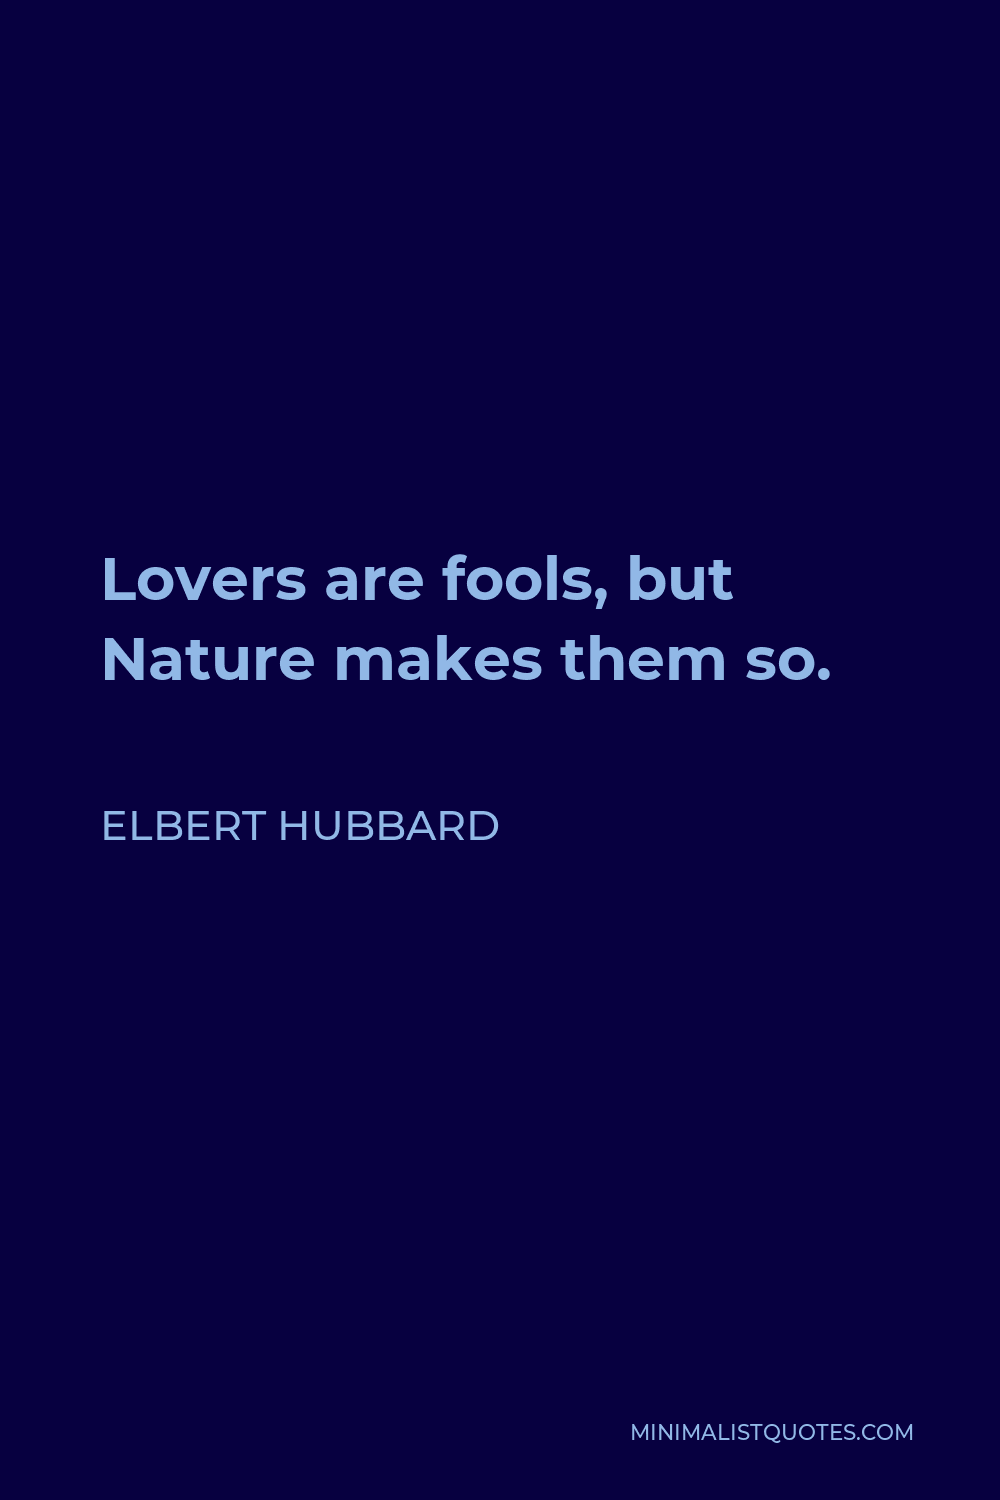 Elbert Hubbard Quote - Lovers are fools, but Nature makes them so.